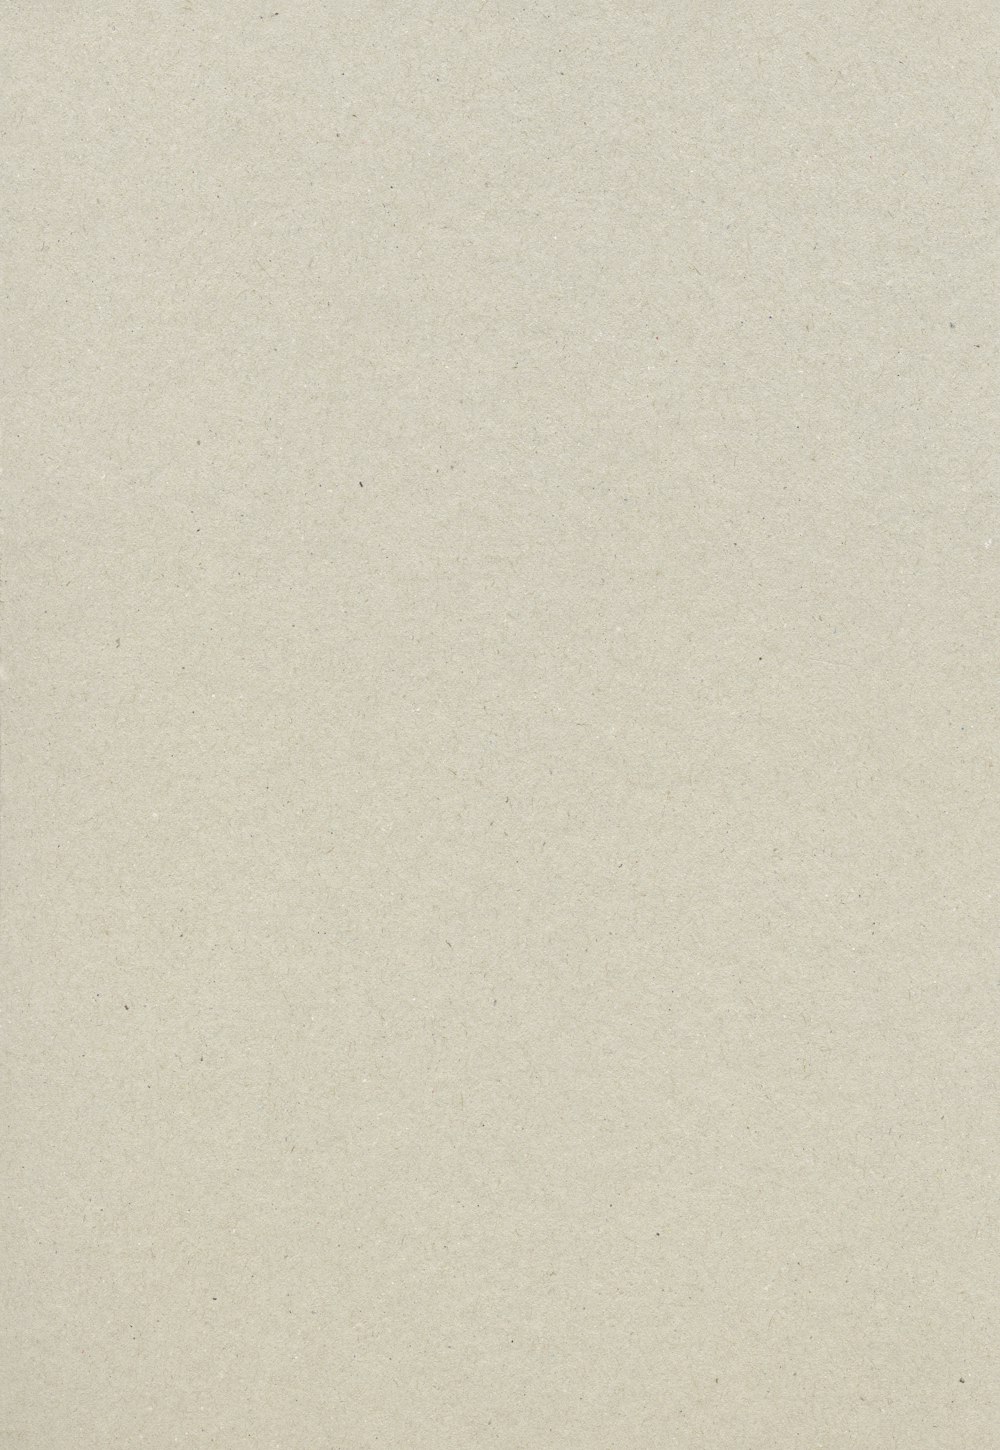 White Card Stock Paper Texture Picture, Free Photograph